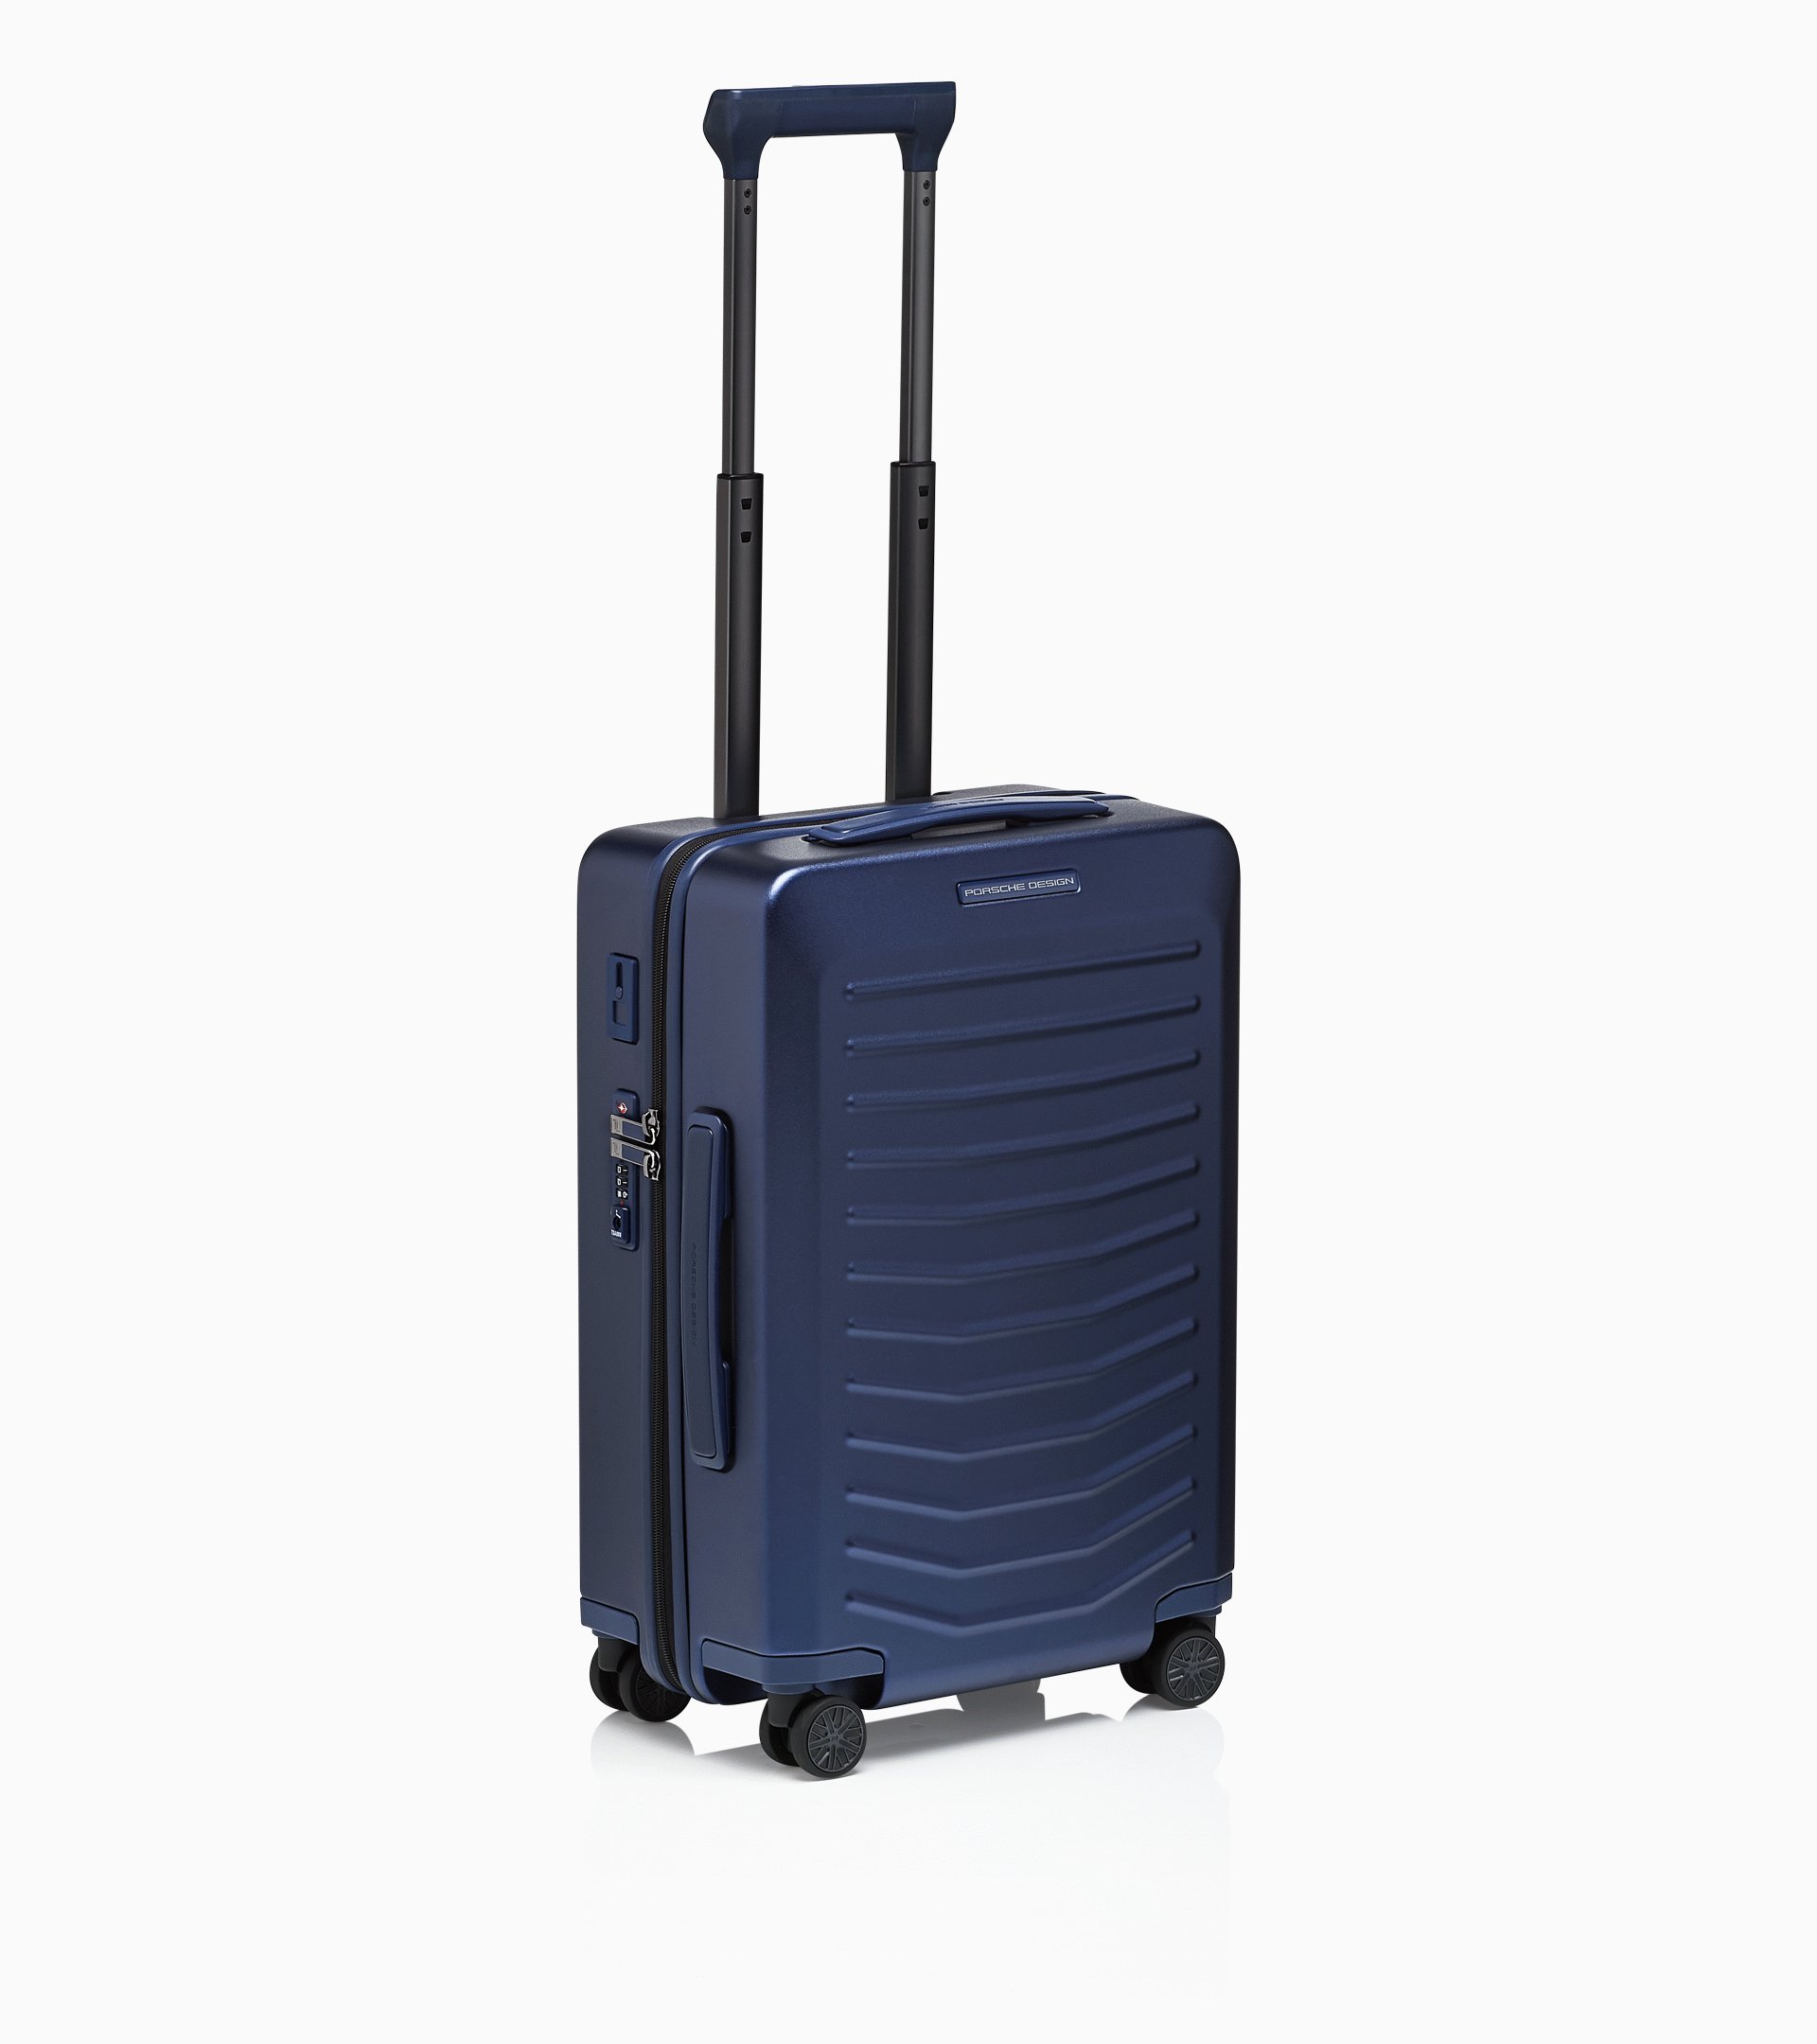 74cm Womens Bags Luggage and suitcases in Blue Porsche Design Roadster Hardcase Trolley 